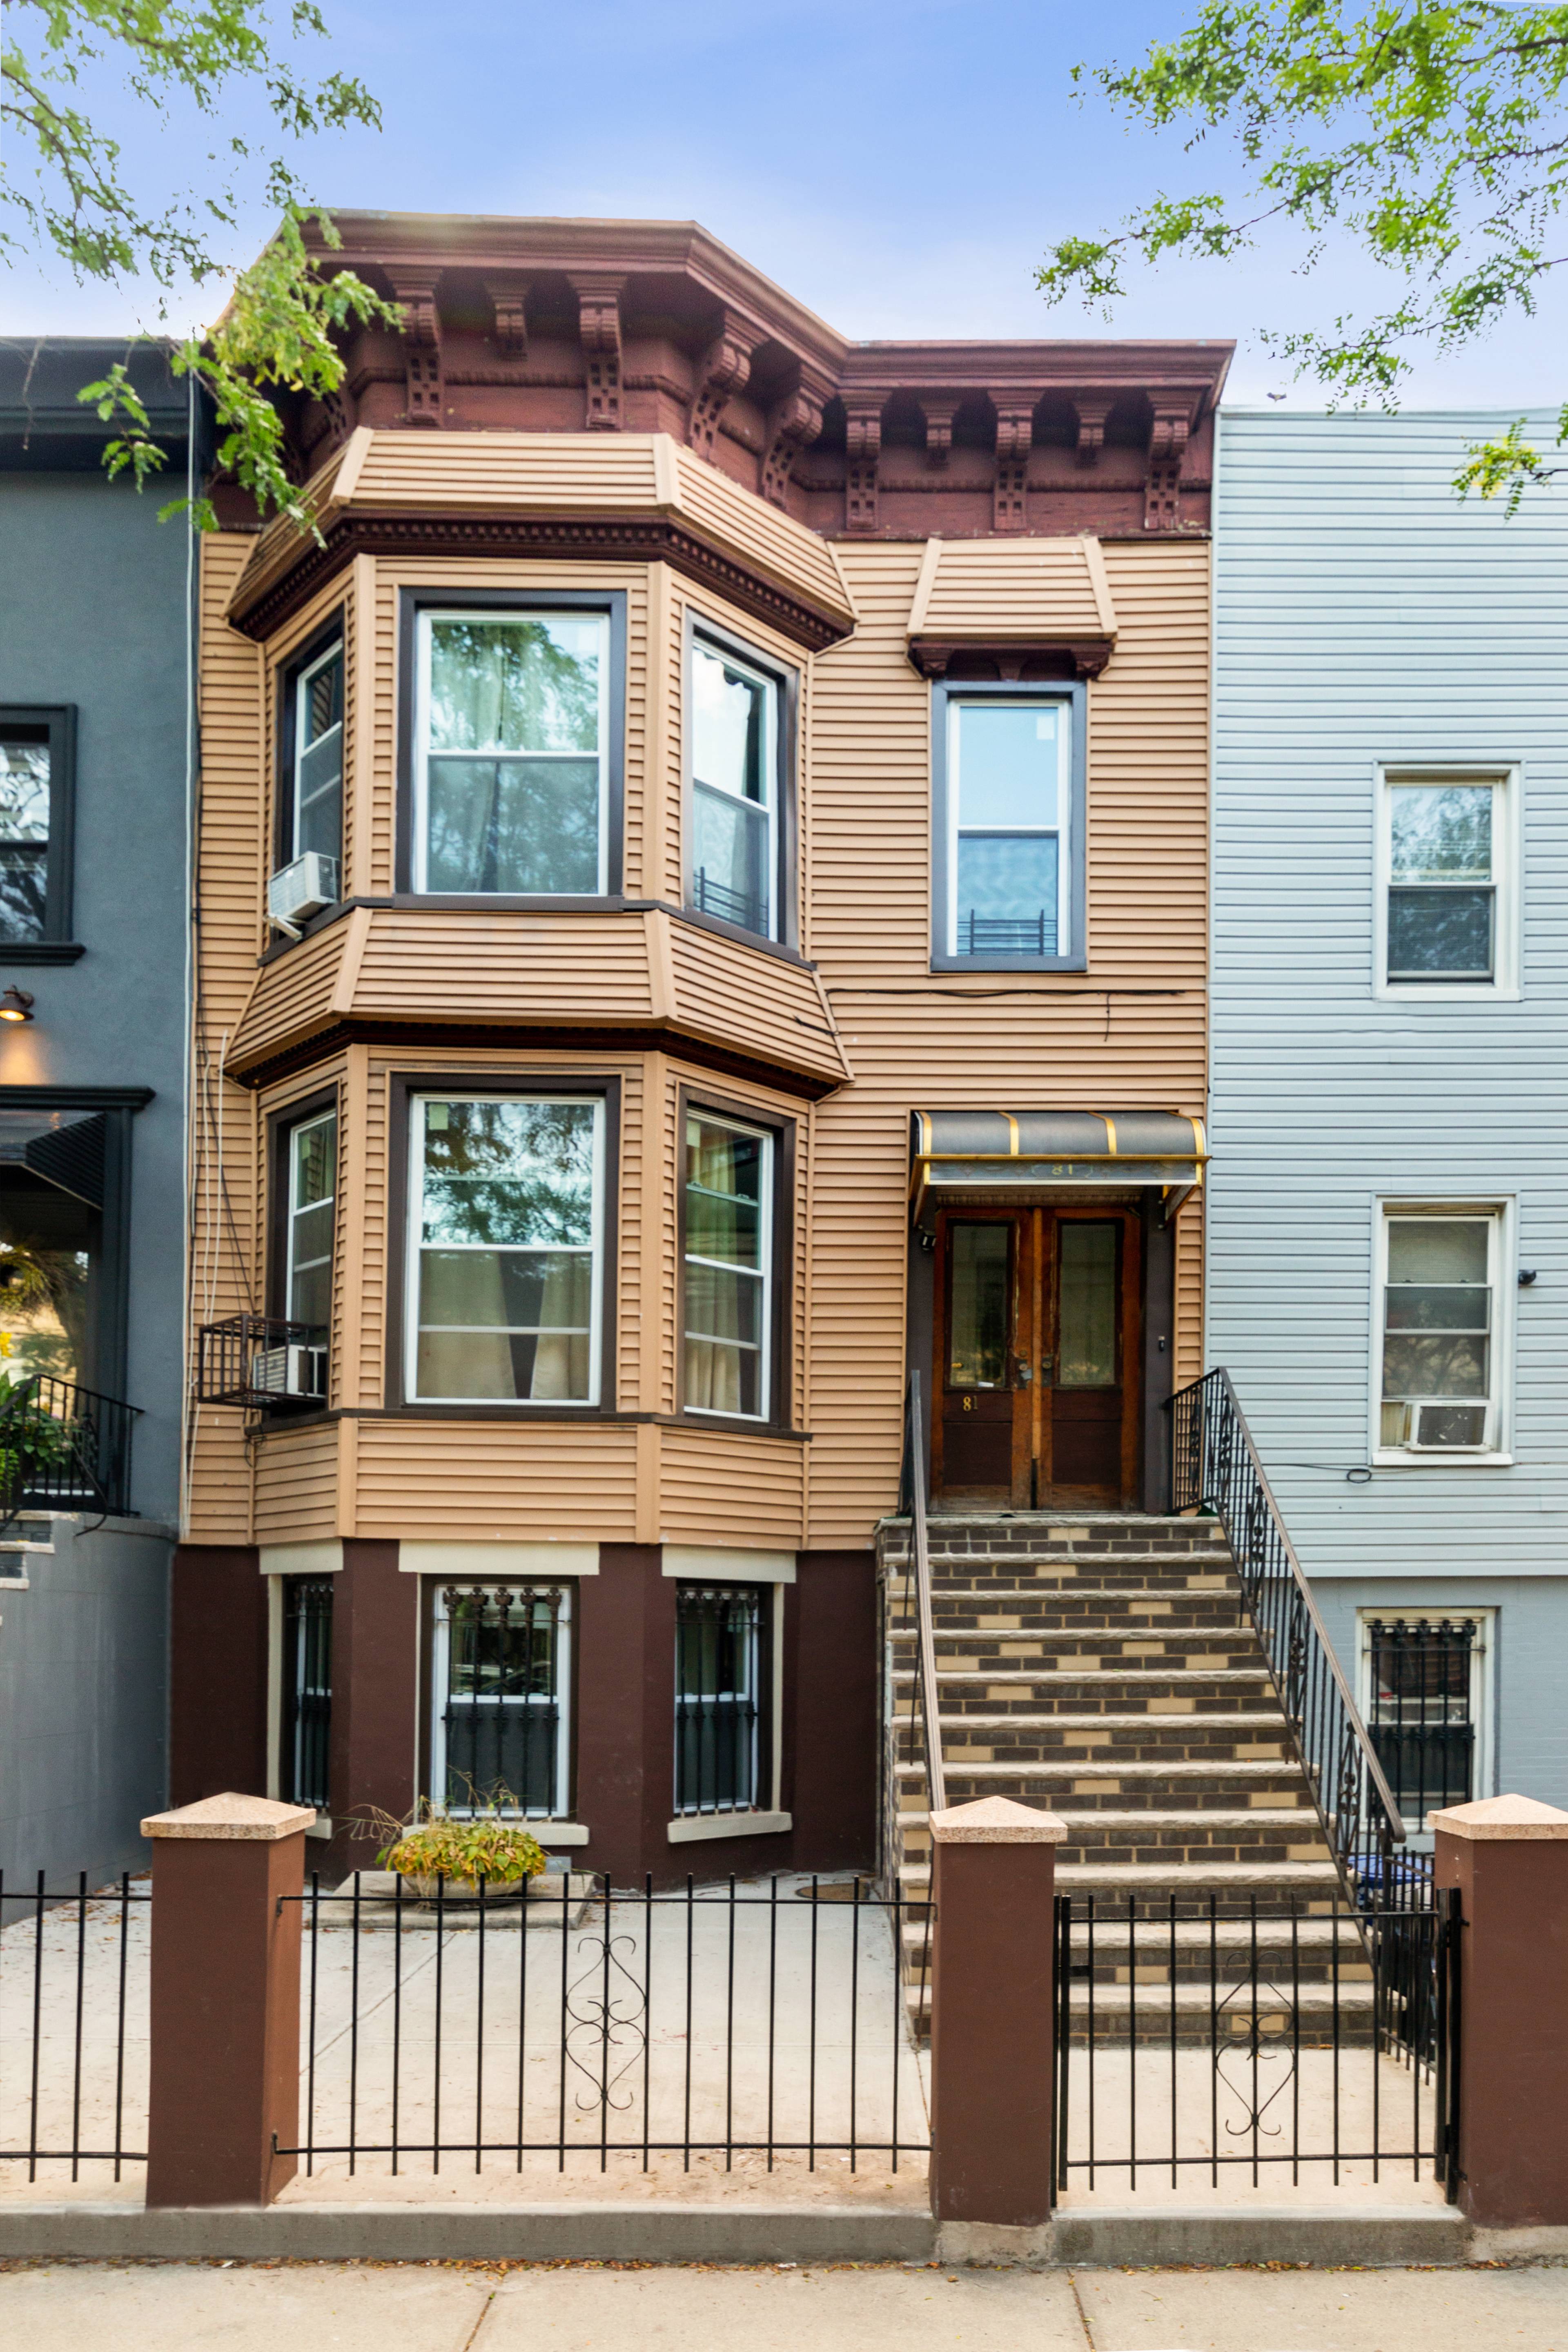 Welcome to 81 Moffat Street, a legal two family on a prime tree lined street in Bushwick.